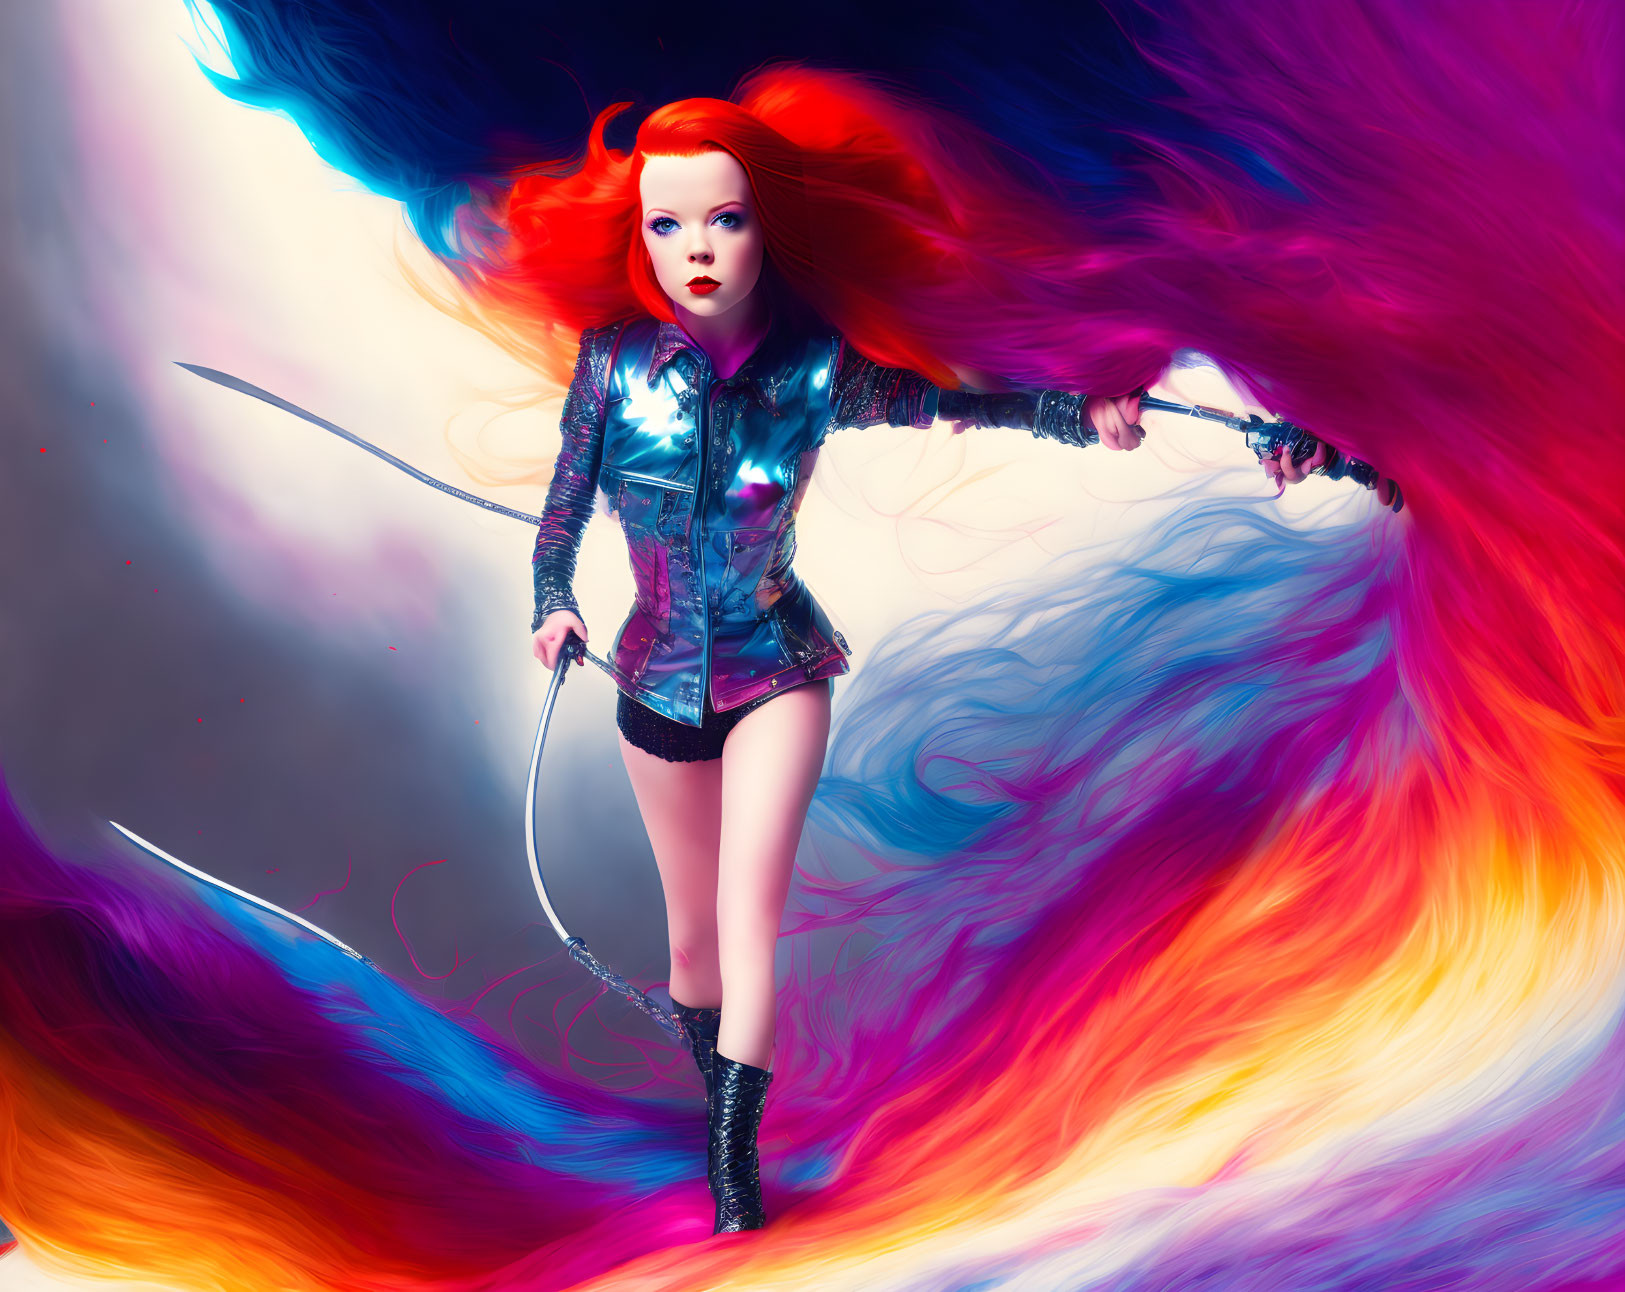 Colorful illustration: girl with red hair and sword in dynamic swirls.